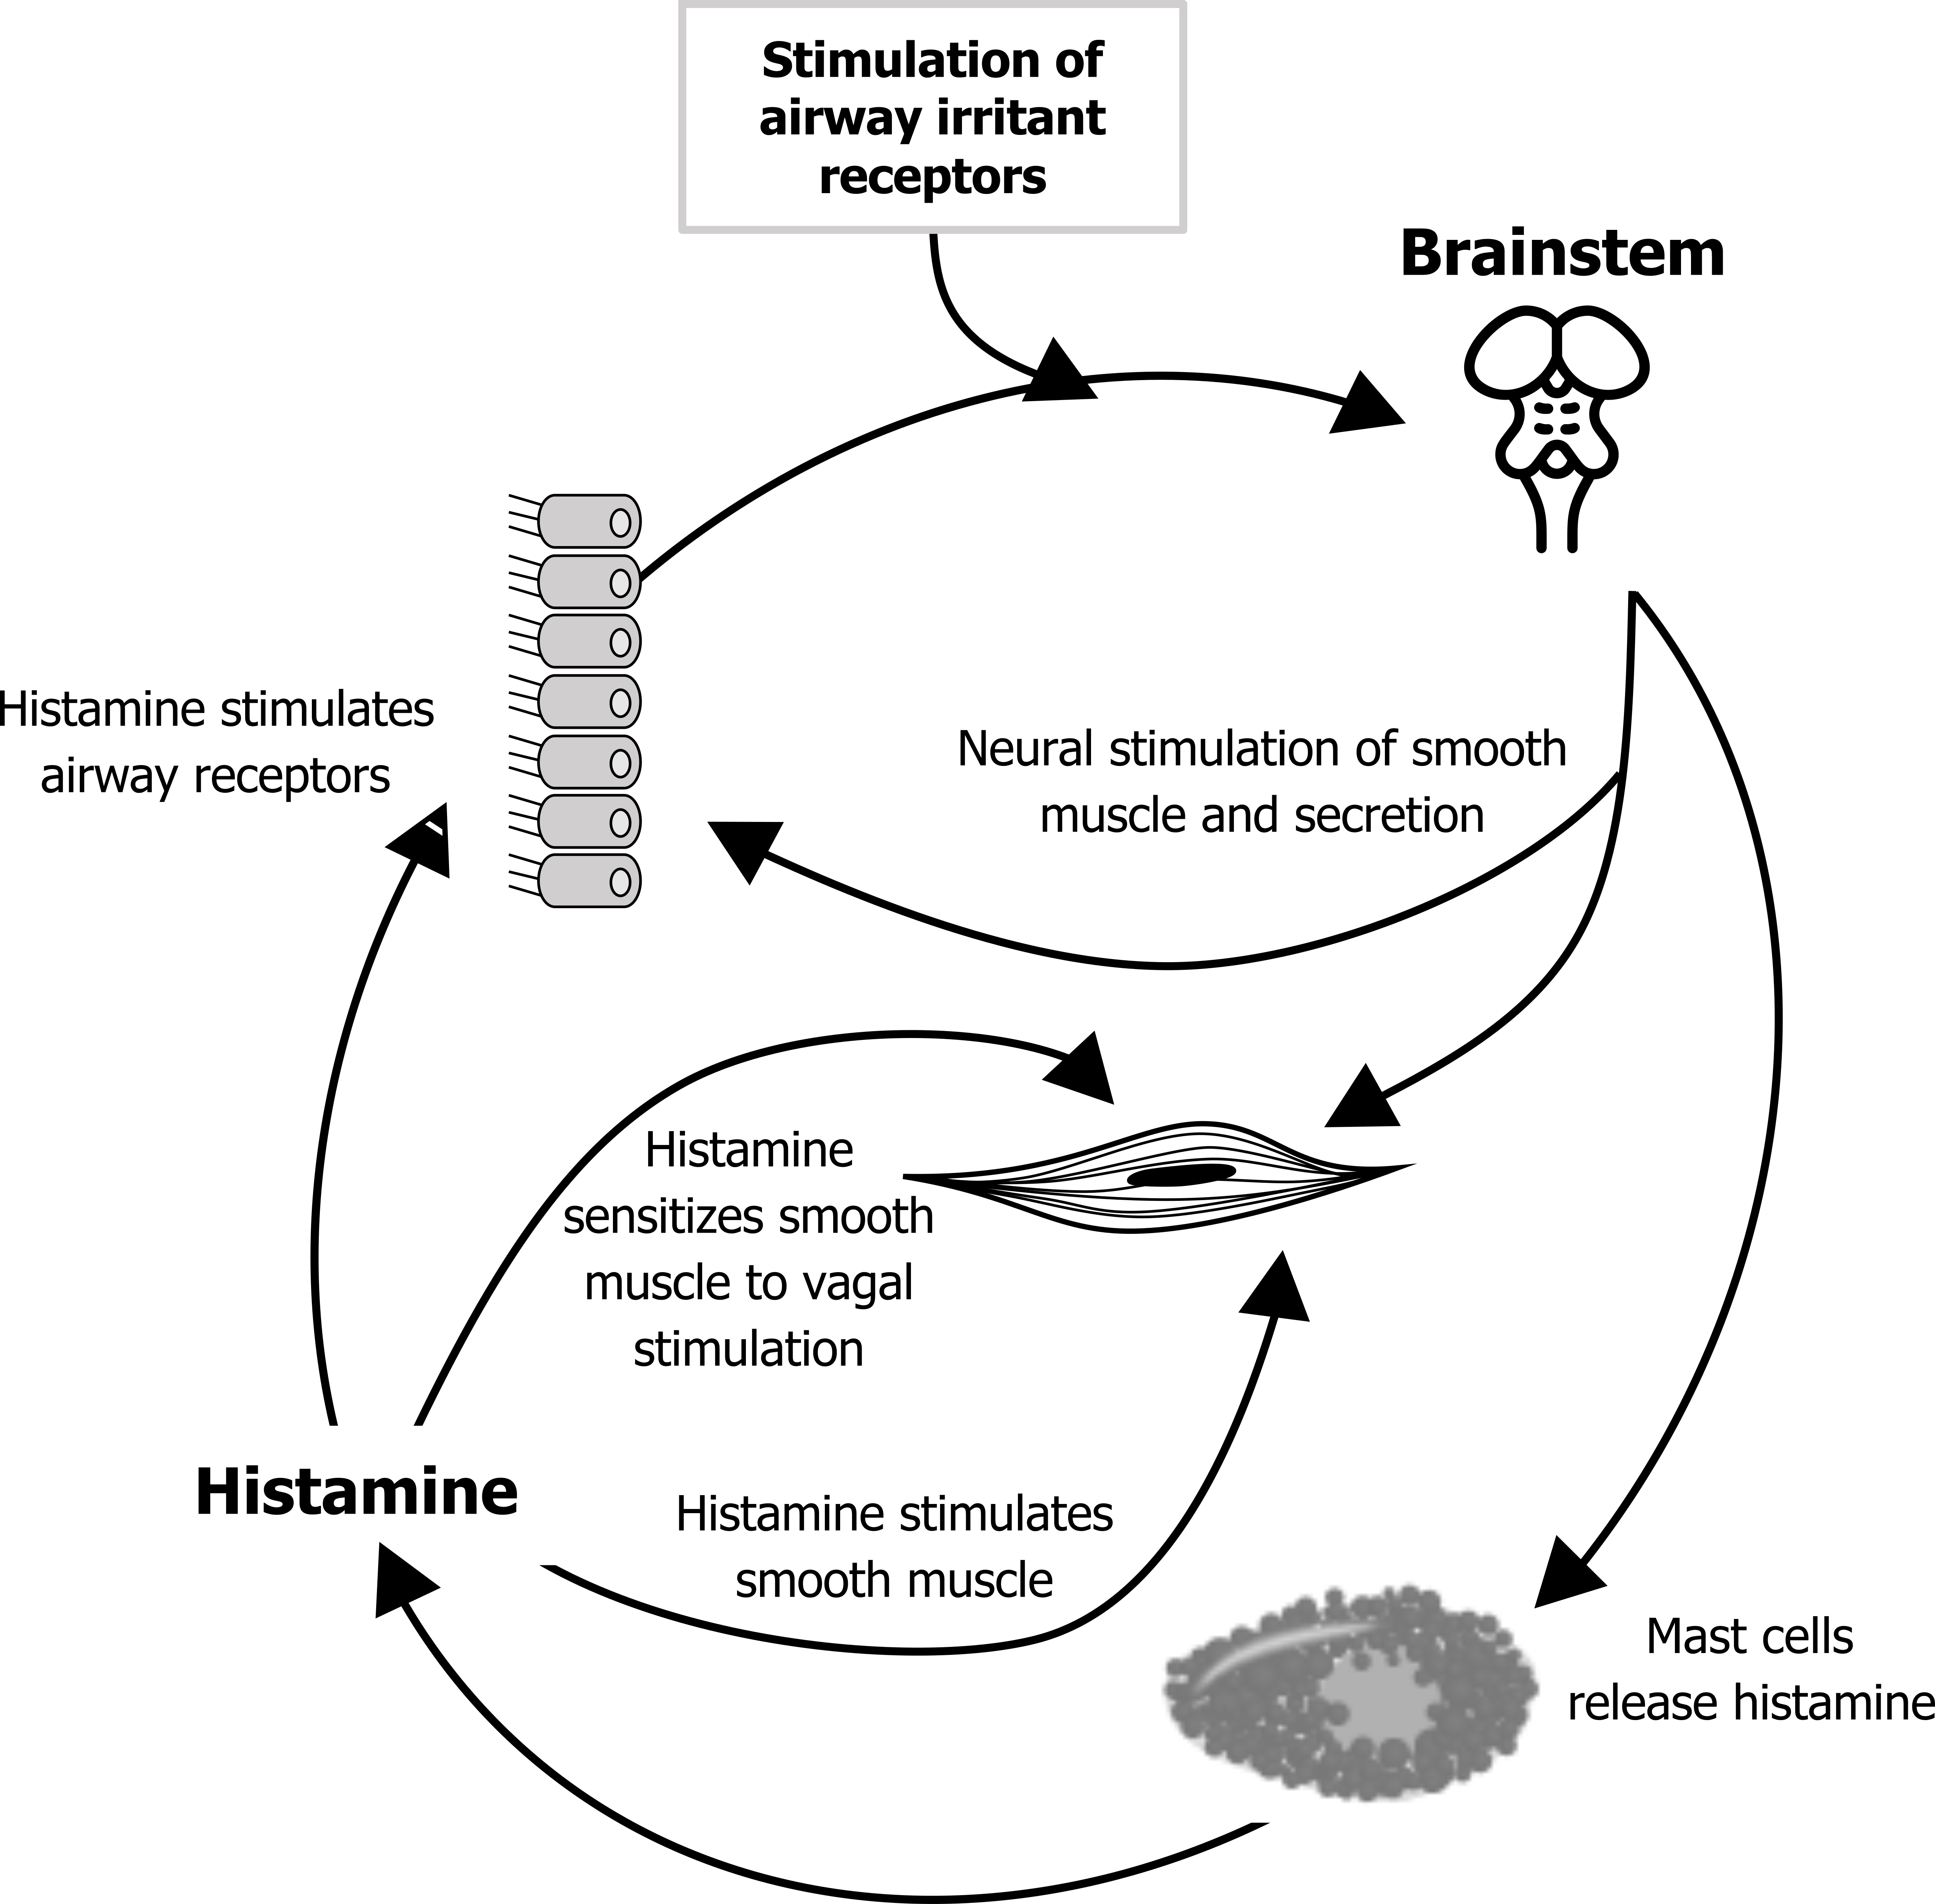 Histamine arrow with text histamine sensitizes smooth muscle to vagal stimulation to image of smooth muscle. Histamine arrow with text histamine stimulates smooth muscle to image of smooth muscle. Histamine arrow with text histamine stimulates airway receptors to image of airway receptors. Image of airway receptors arrow to brainstem. Brainstem arrow with text neural stimulation of smooth muscle and secretion to image of airway receptors. Brain stem arrow with text mast cells release histamine to mast cell image. Brainstem arrow to image of smooth muscle. Mast cell image arrow to histamine.